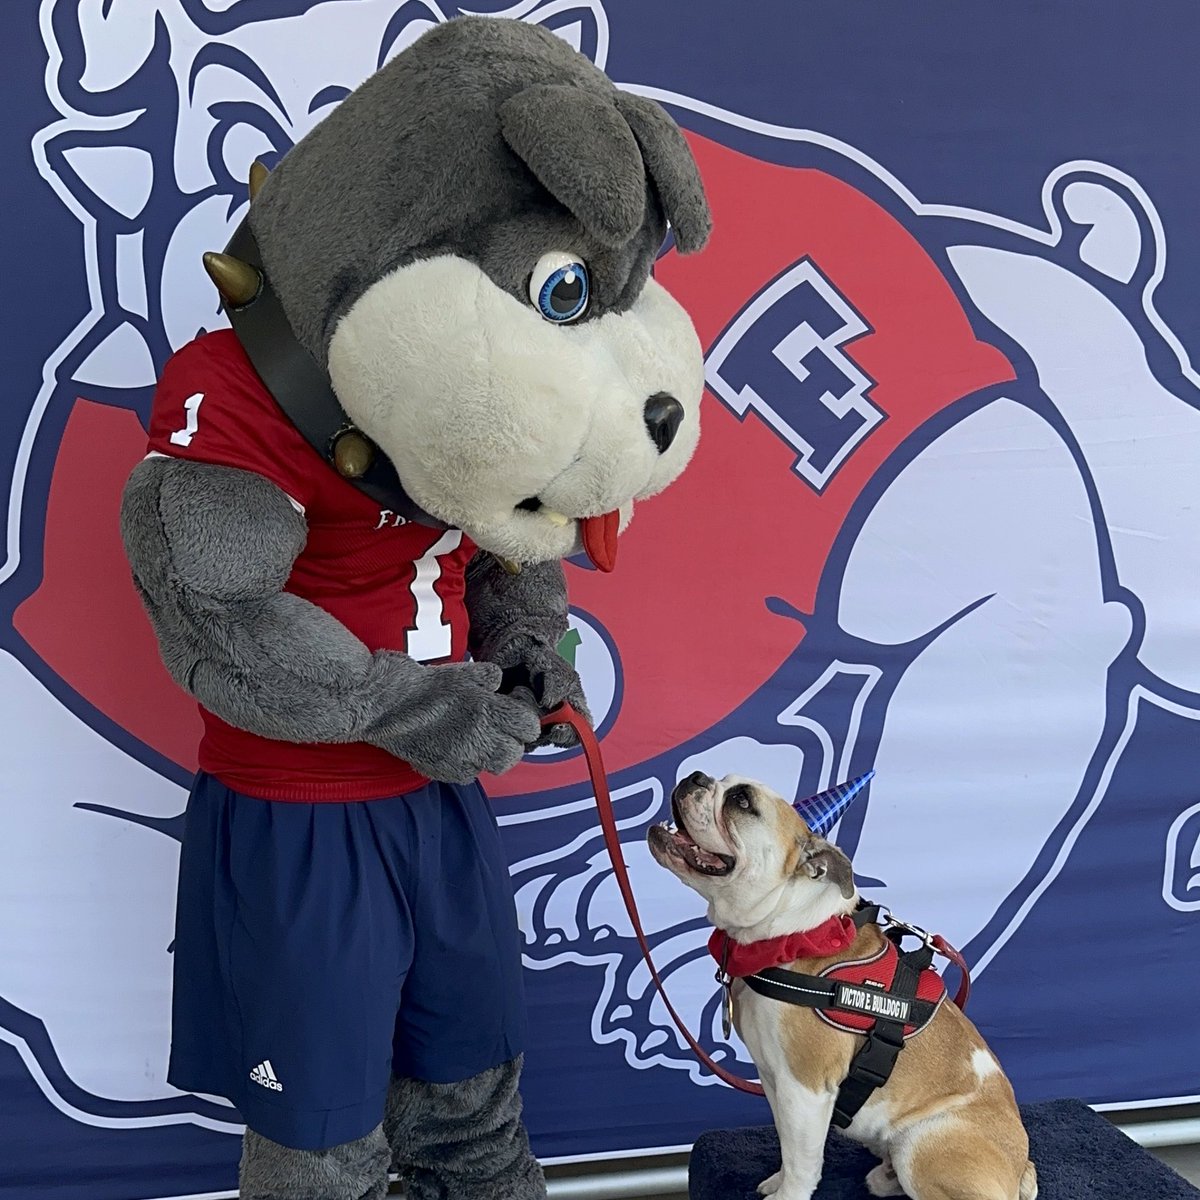 Party animals! 🥳

We had a great time celebrating @VictorEBulldog’s first birthday at Fresno Lexus. #GoDogs